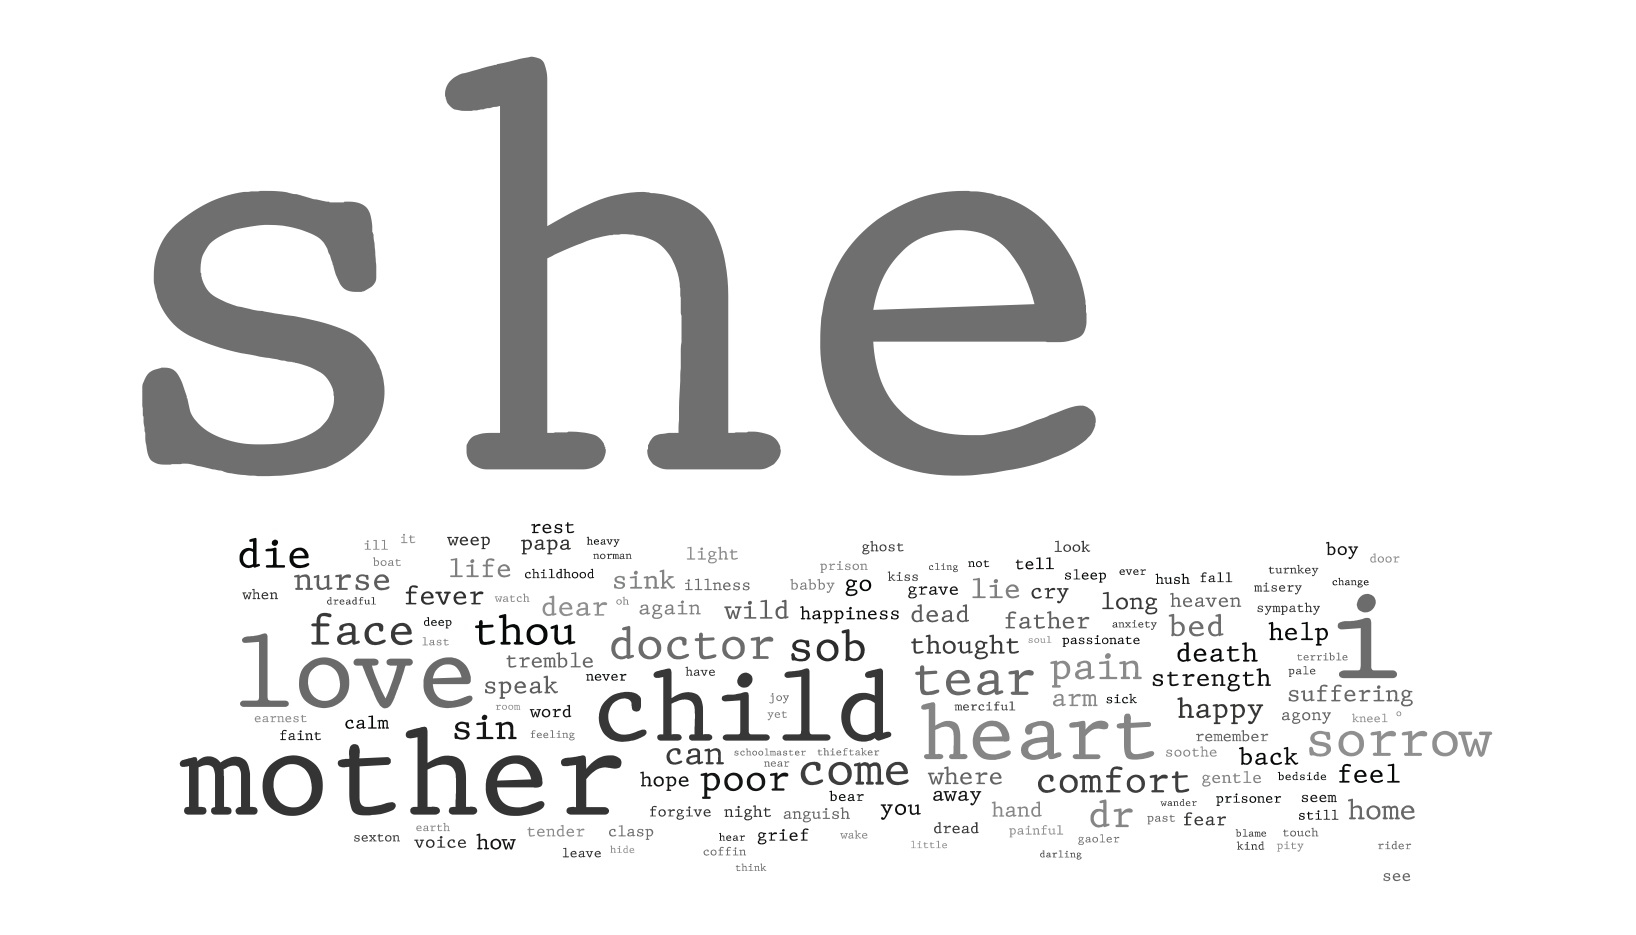 Visualisation of Words Over-Represented in Sentimental Texts (Including Stopwords)